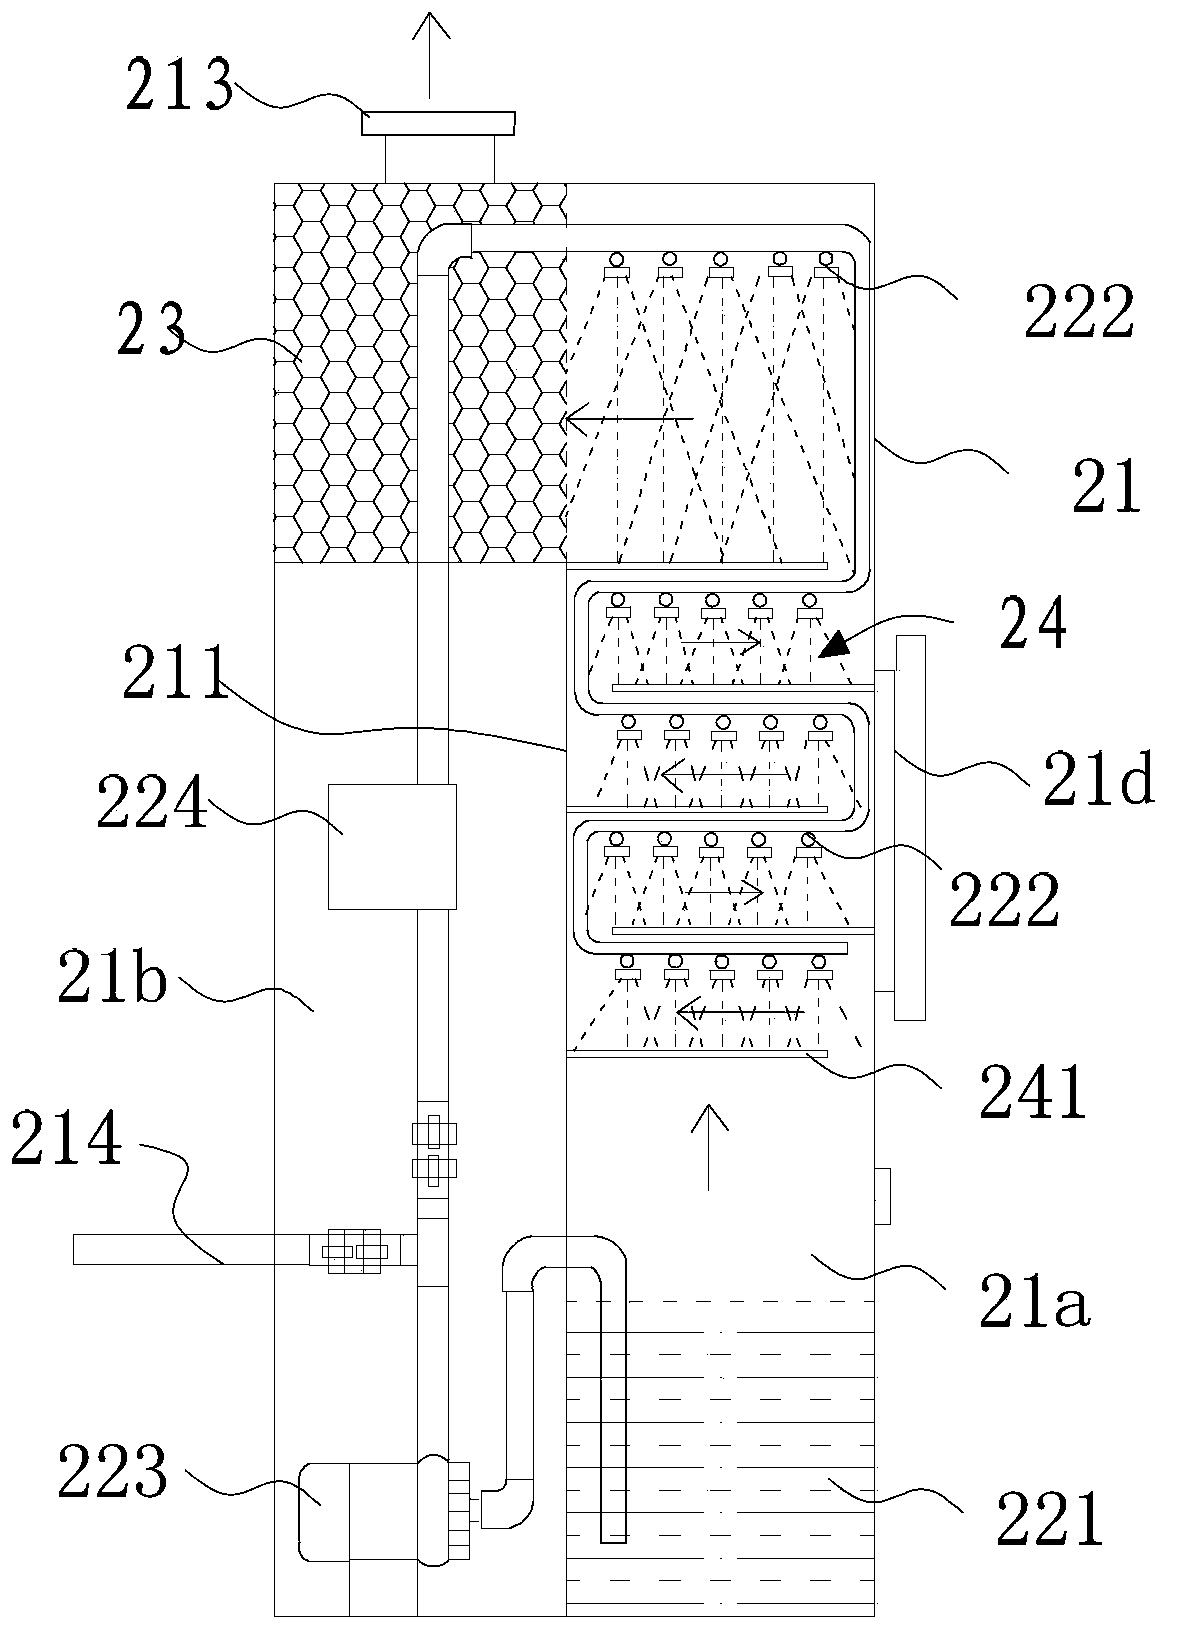 Waste gas and dust treating device